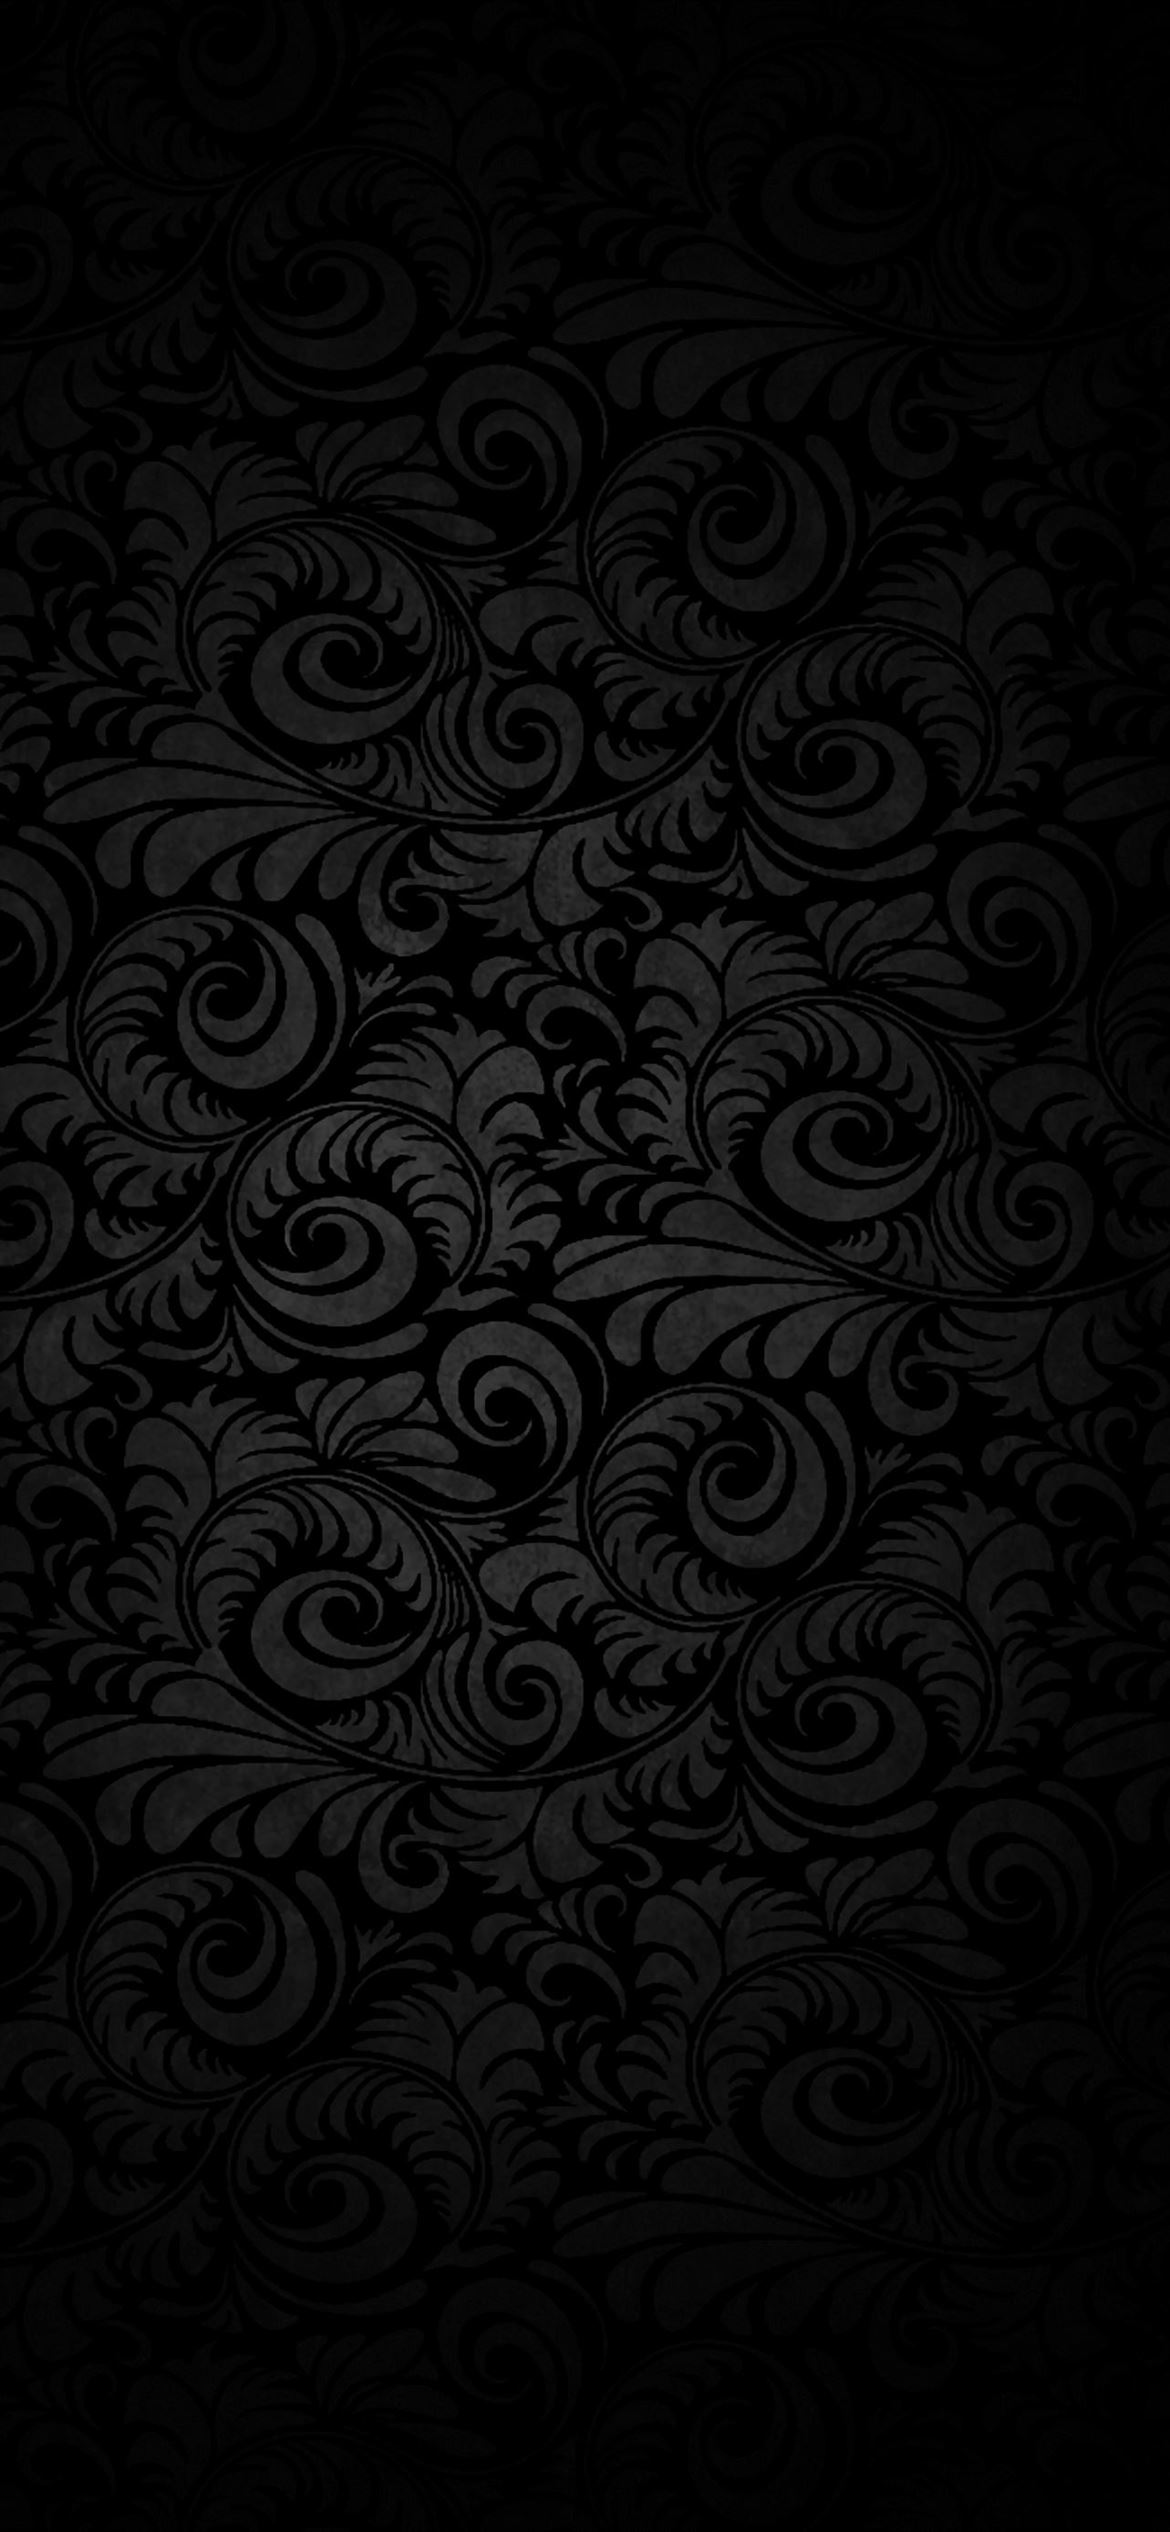 Dark patterned background iPhone Wallpapers Free Download